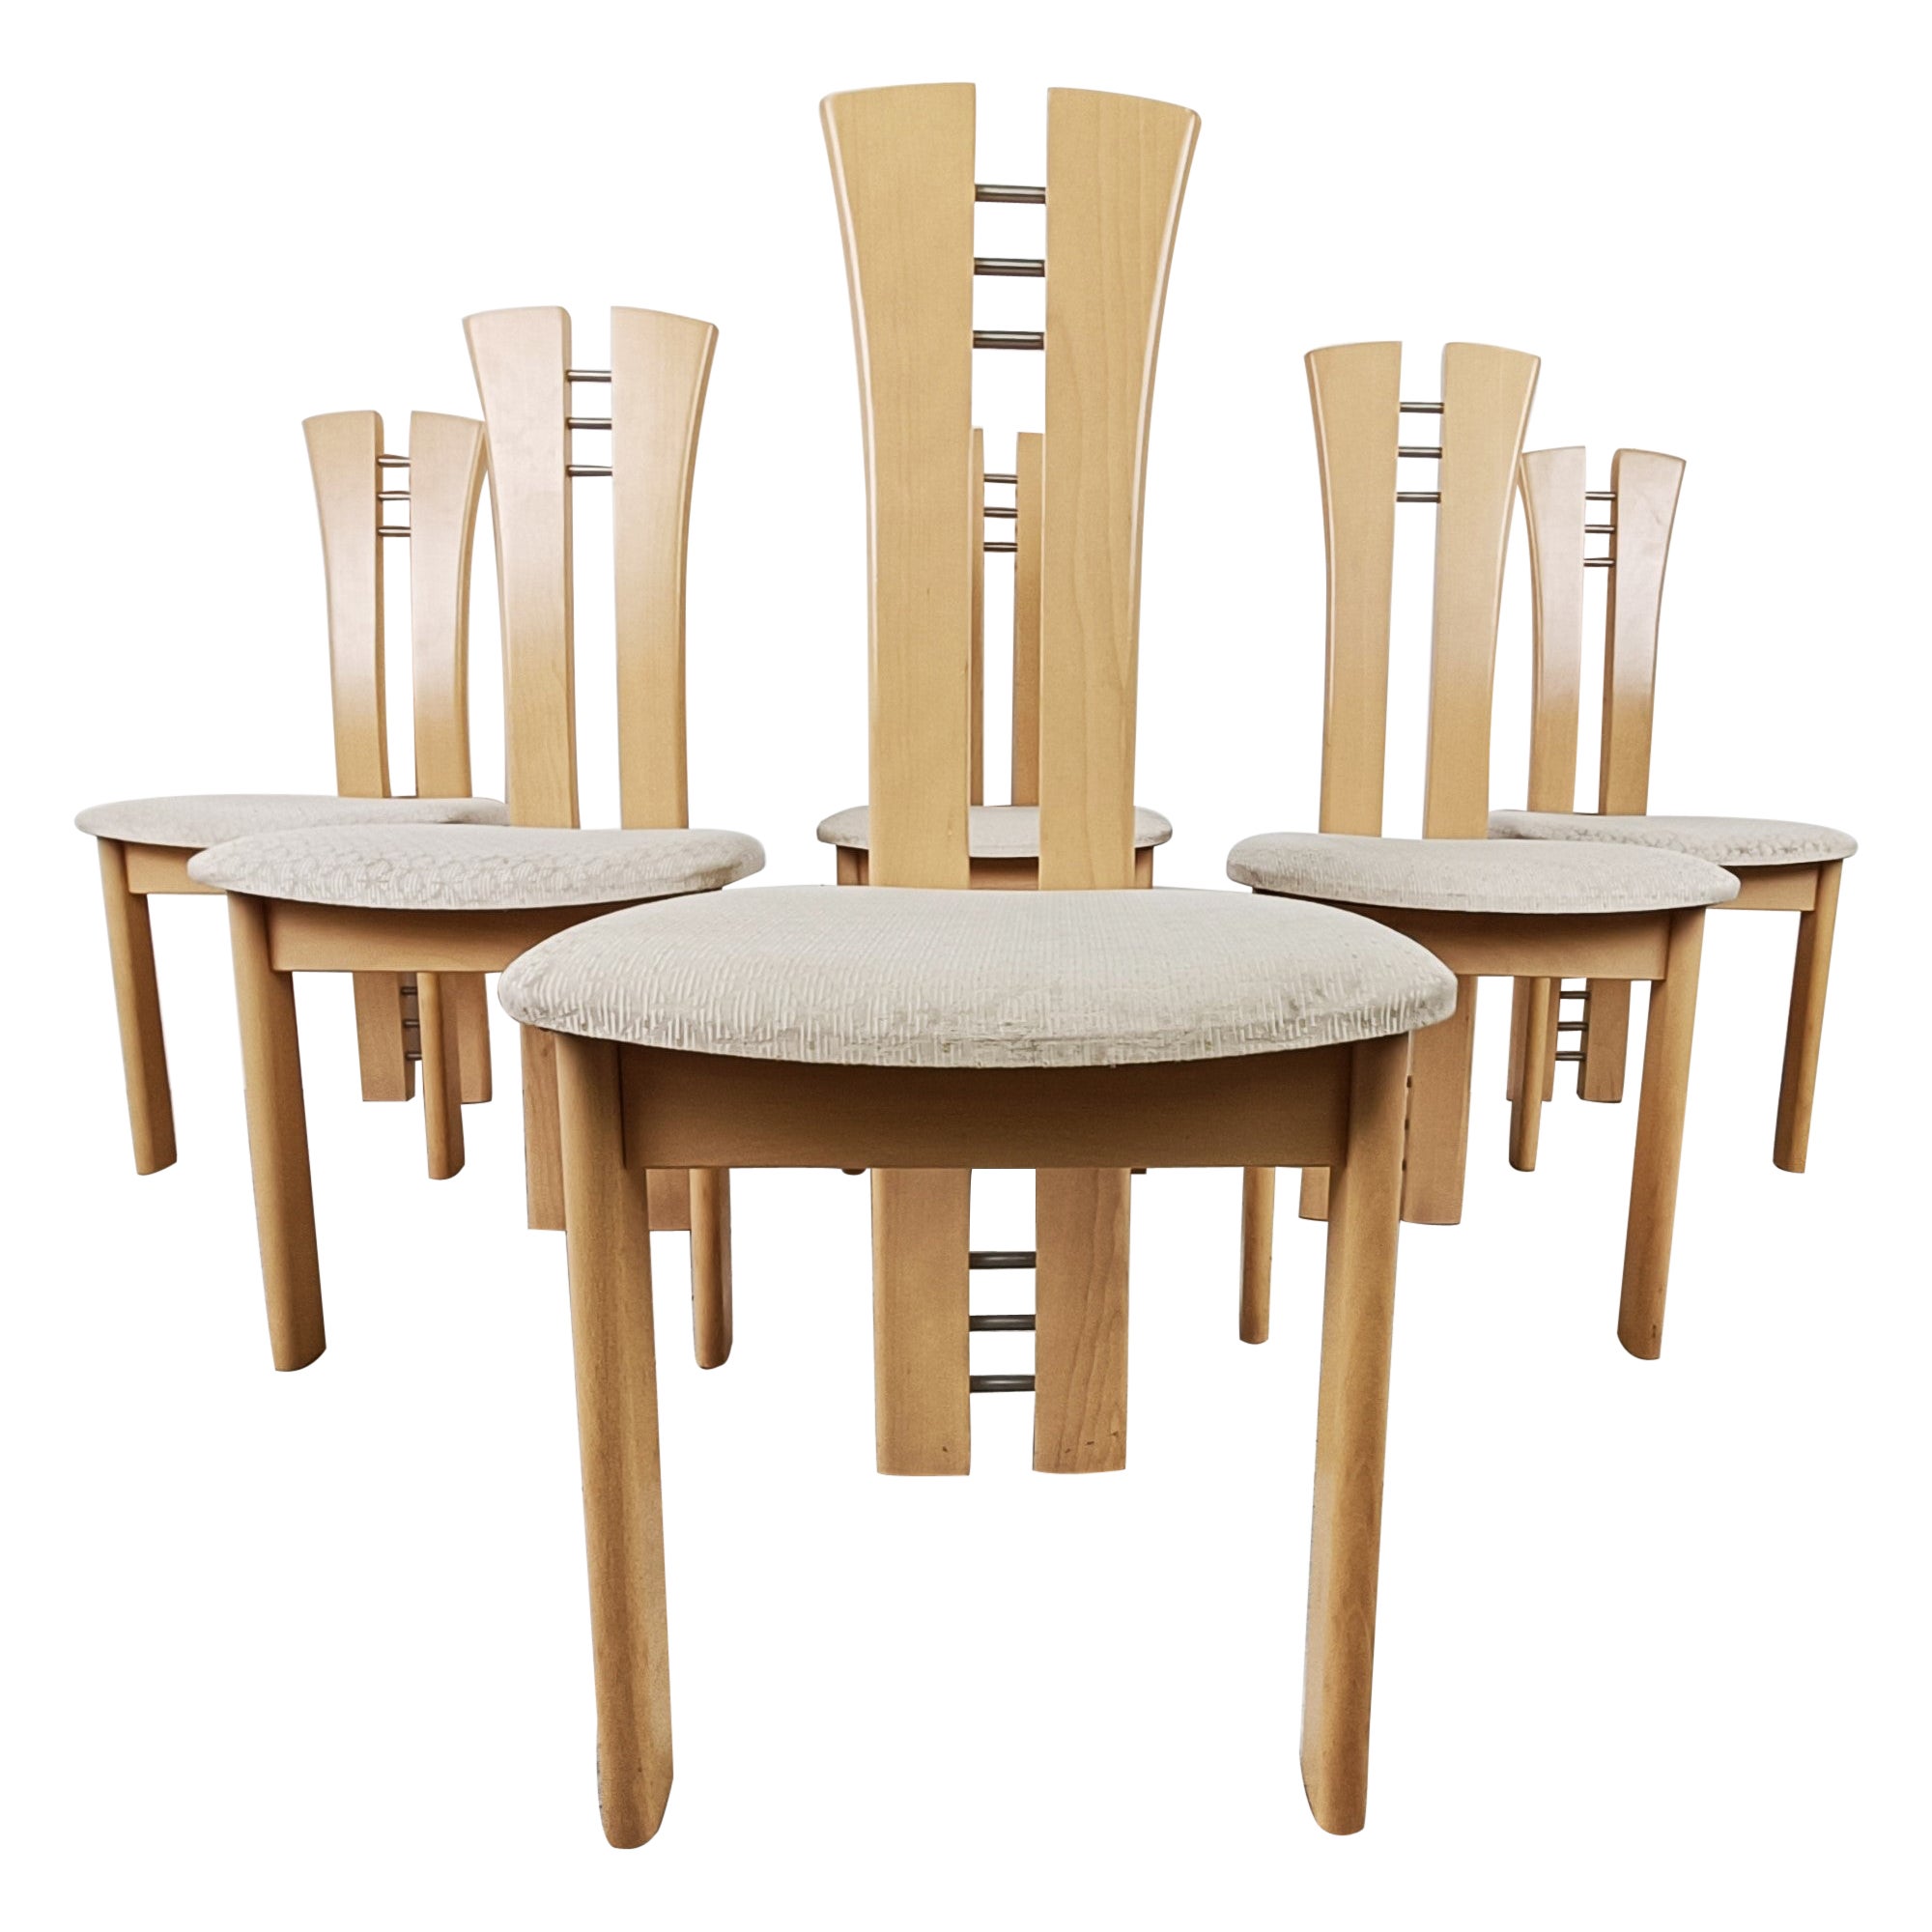 Set of 6 Wooden High Back Dining Chairs, 1990s For Sale